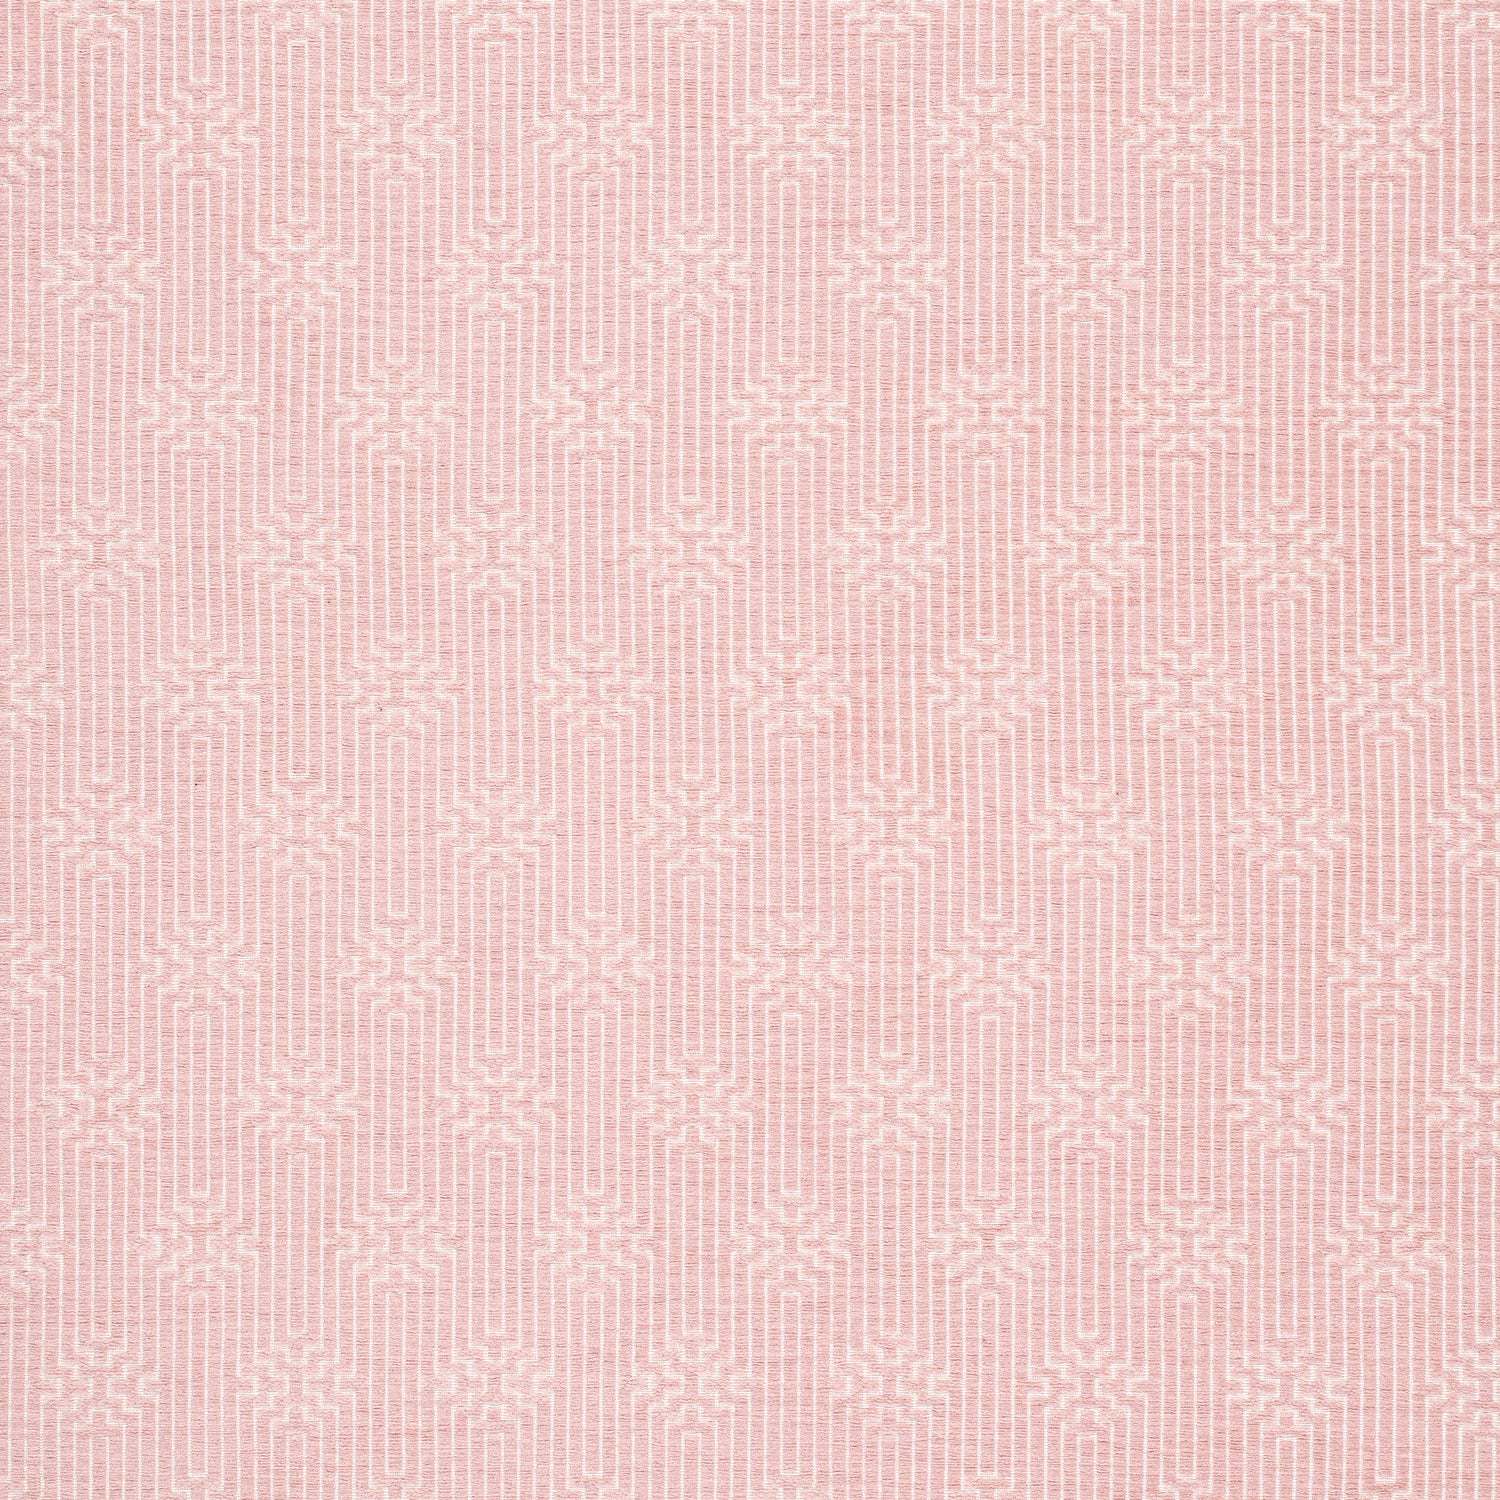 Crete fabric in blossom color - pattern number W74215 - by Thibaut in the Passage collection